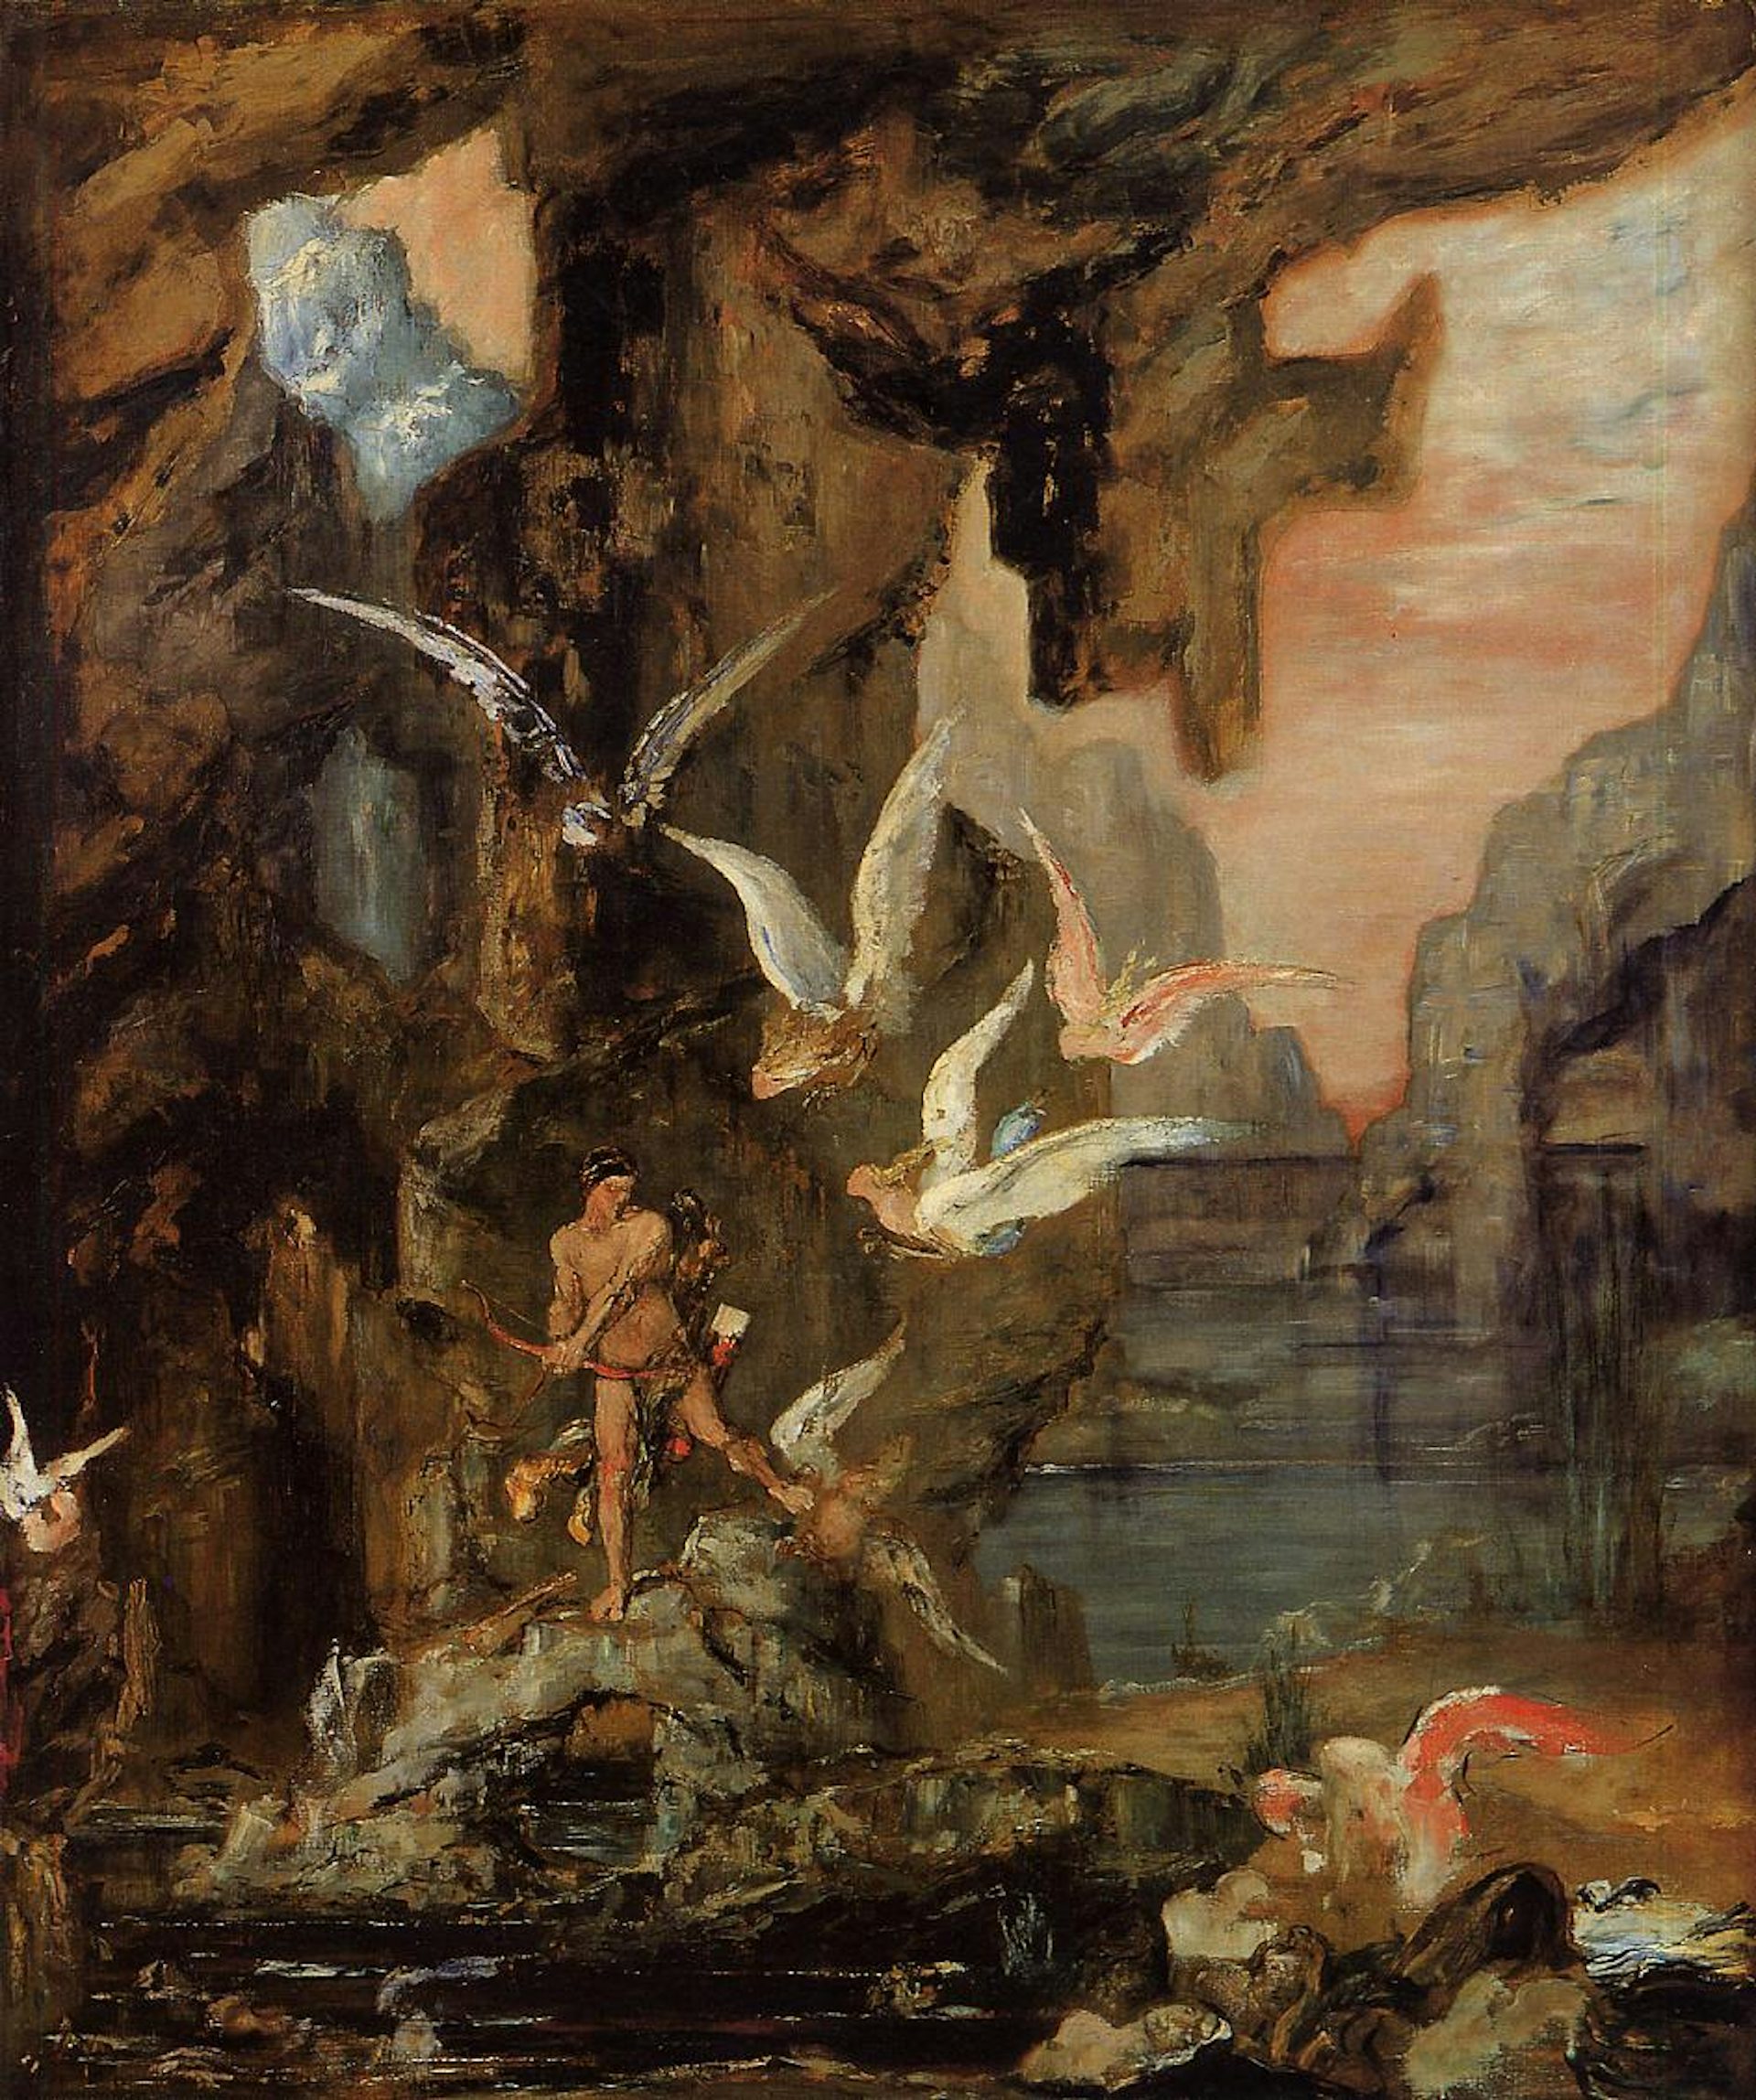 Hercules at Lake Stymphalus by Gustave Moreau